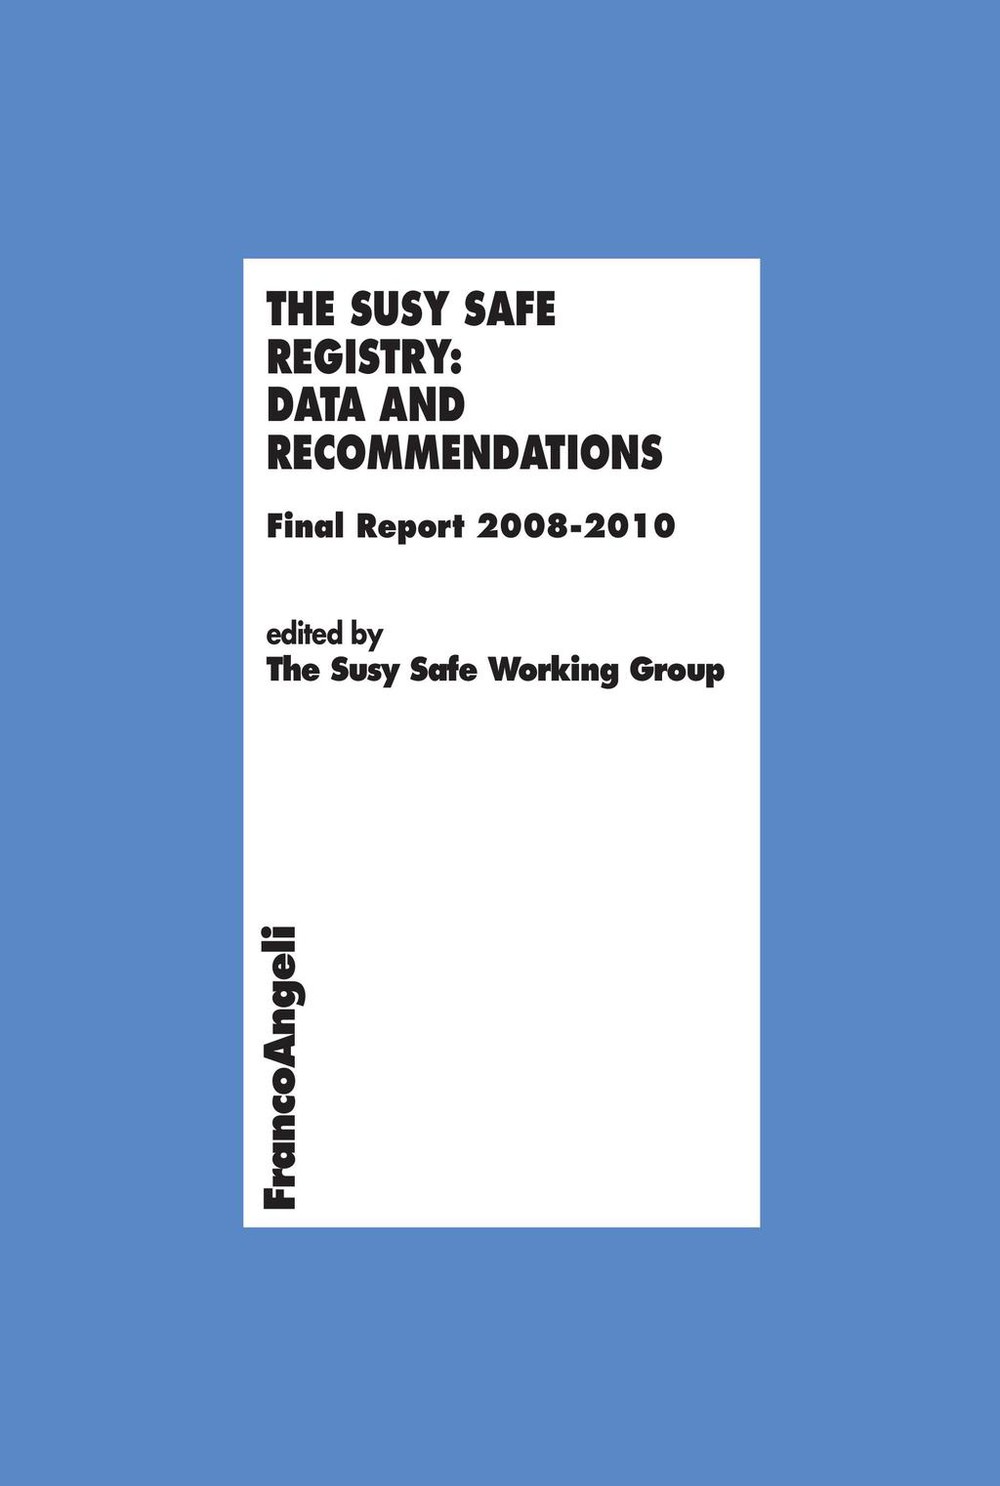 The Susy Safe registry: data and recommendations. Final Report 2008-2010 - Librerie.coop